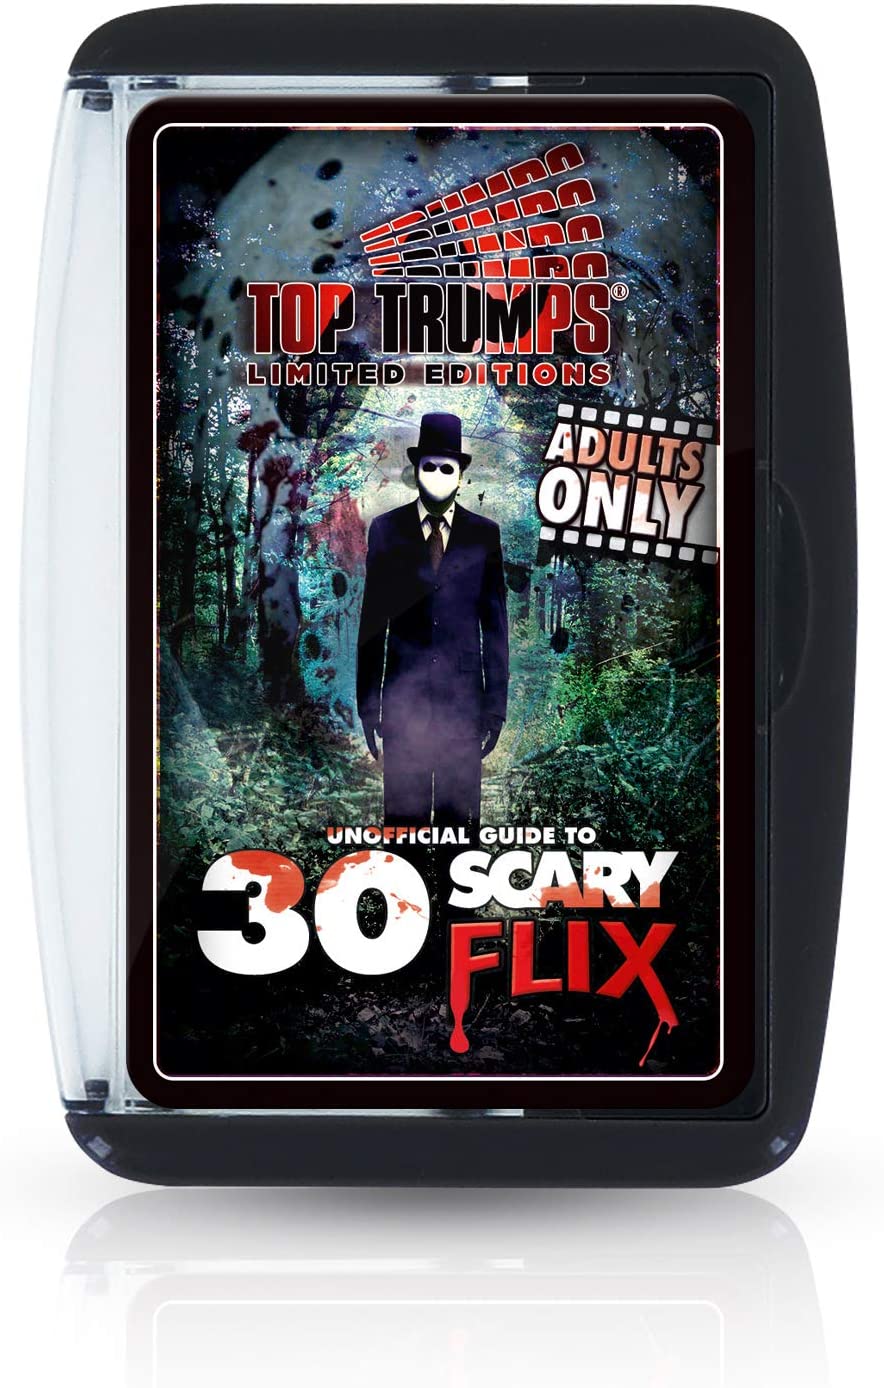 Top Trumps Unofficial Guide to Top 30 Scary Flix Card Game